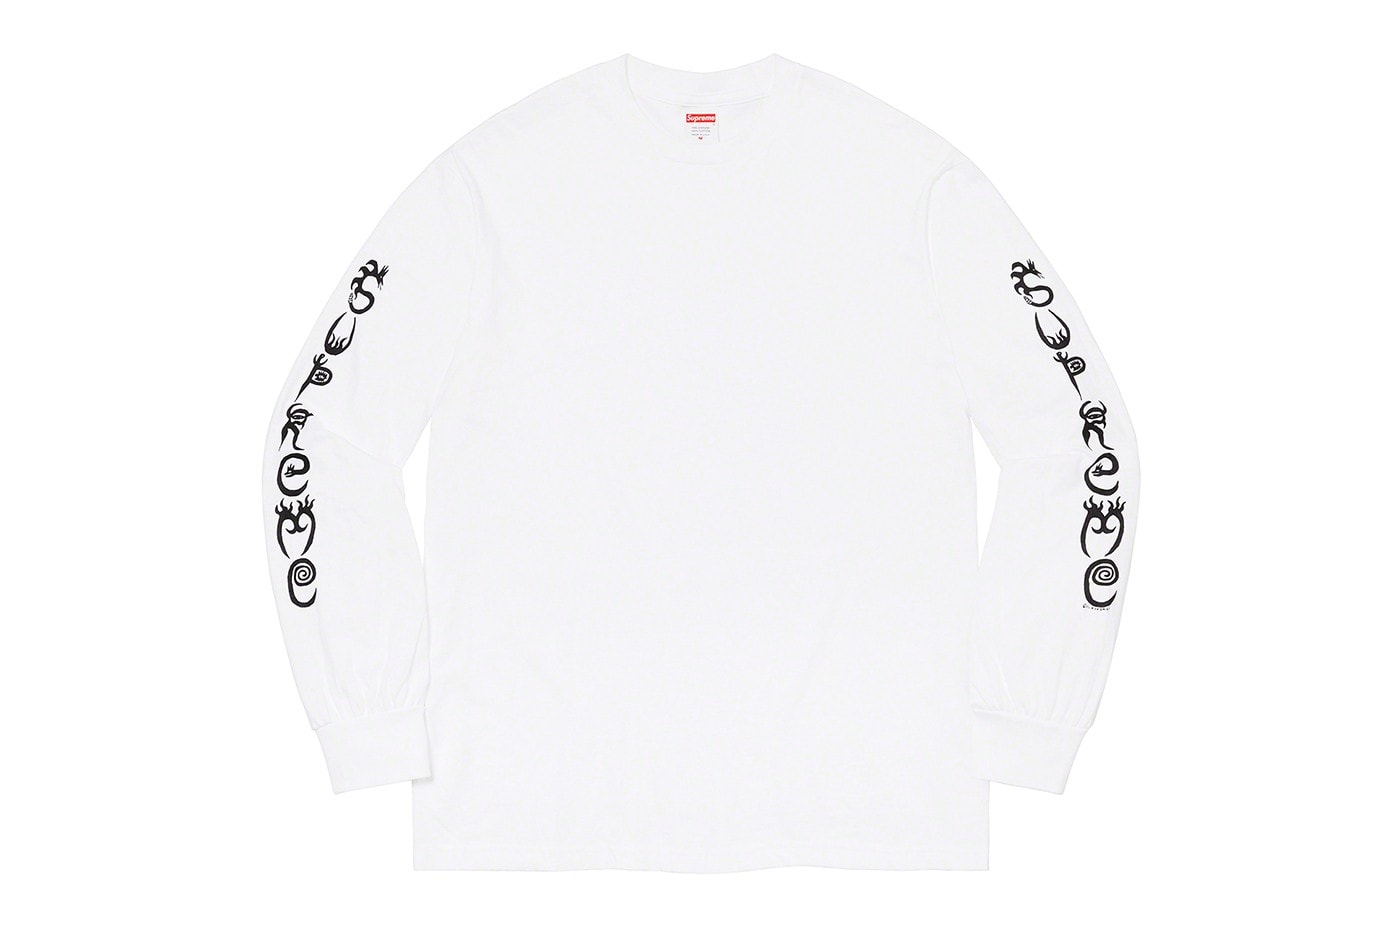 Supreme Summer 2021 Tees Release Info T-Shirts